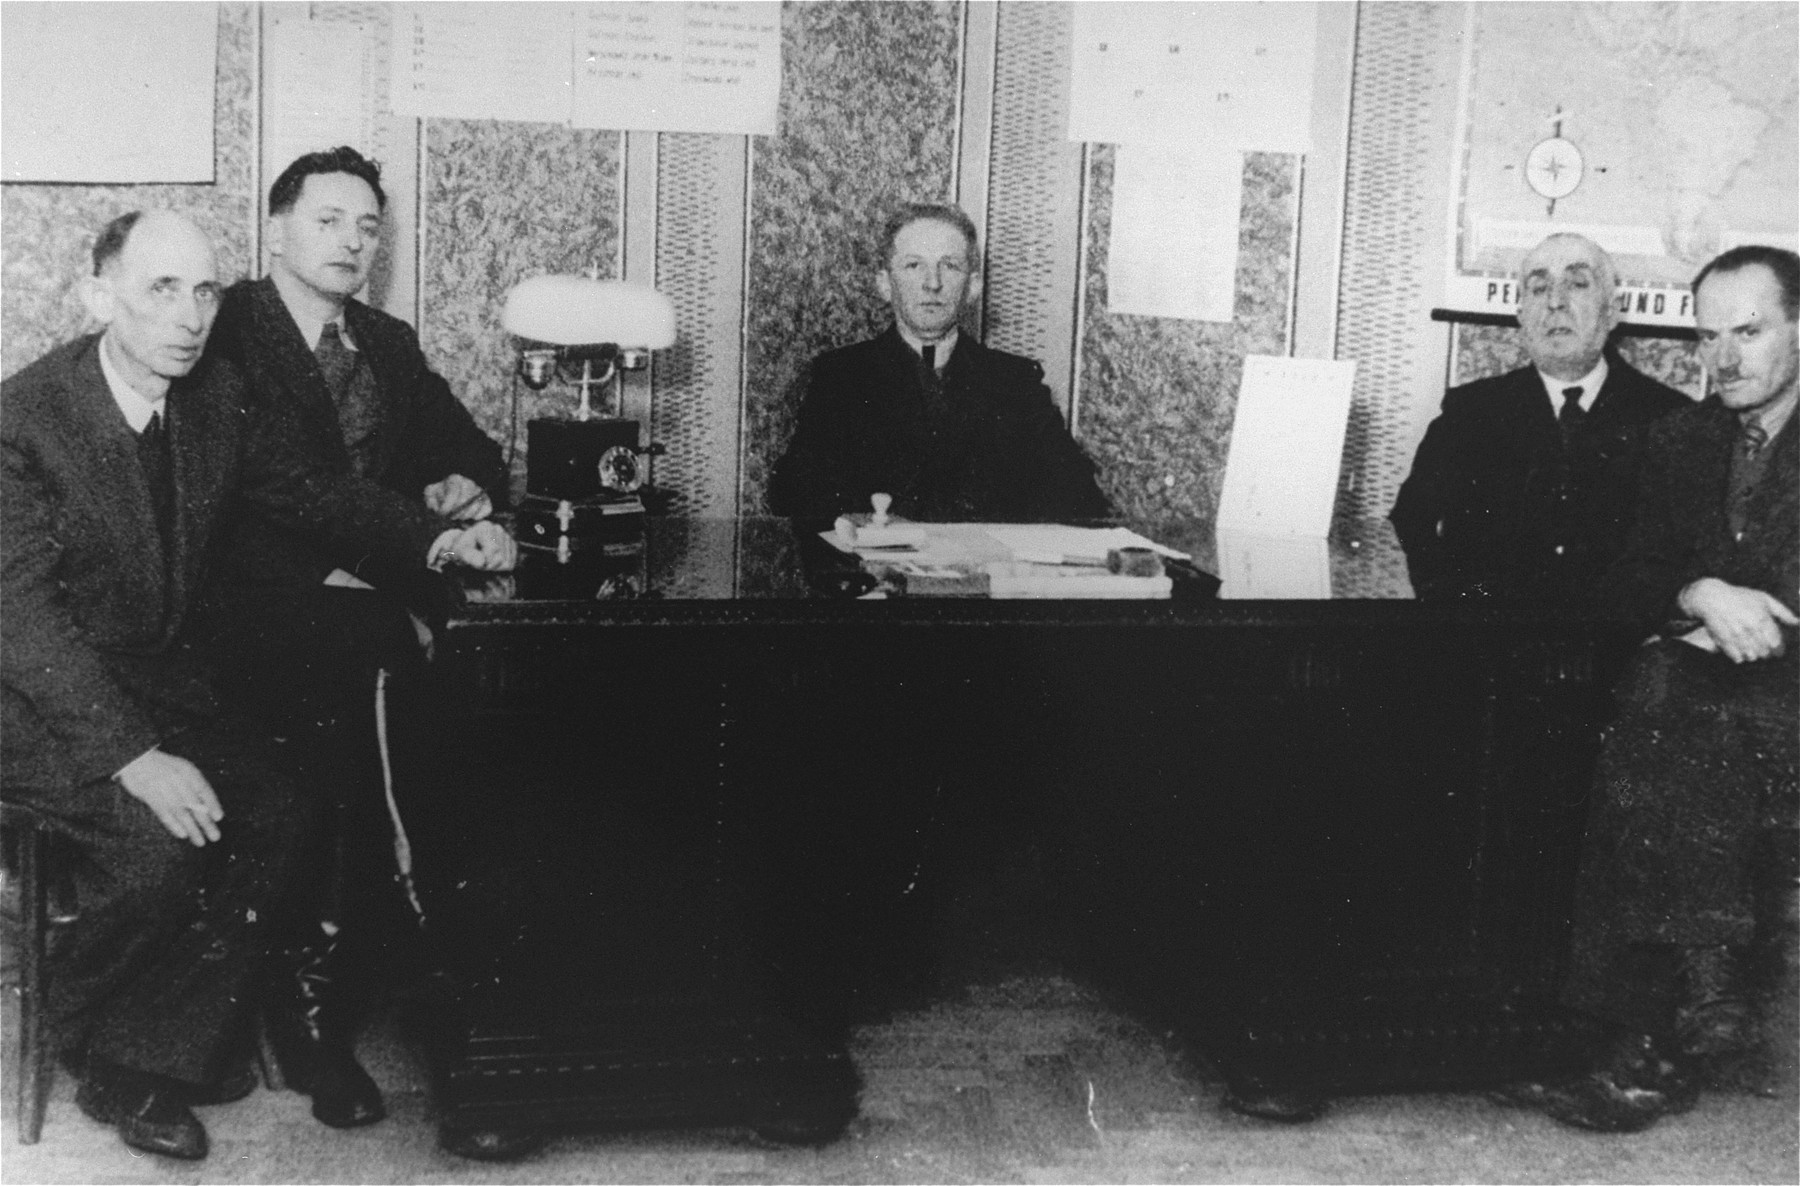 Members of the ghetto administration pose around a desk in the office of the Judenrat in the Kielce ghetto.

This photo was one the images included in an official album prepared by the Judenrat of the Kielce ghetto in 1942.